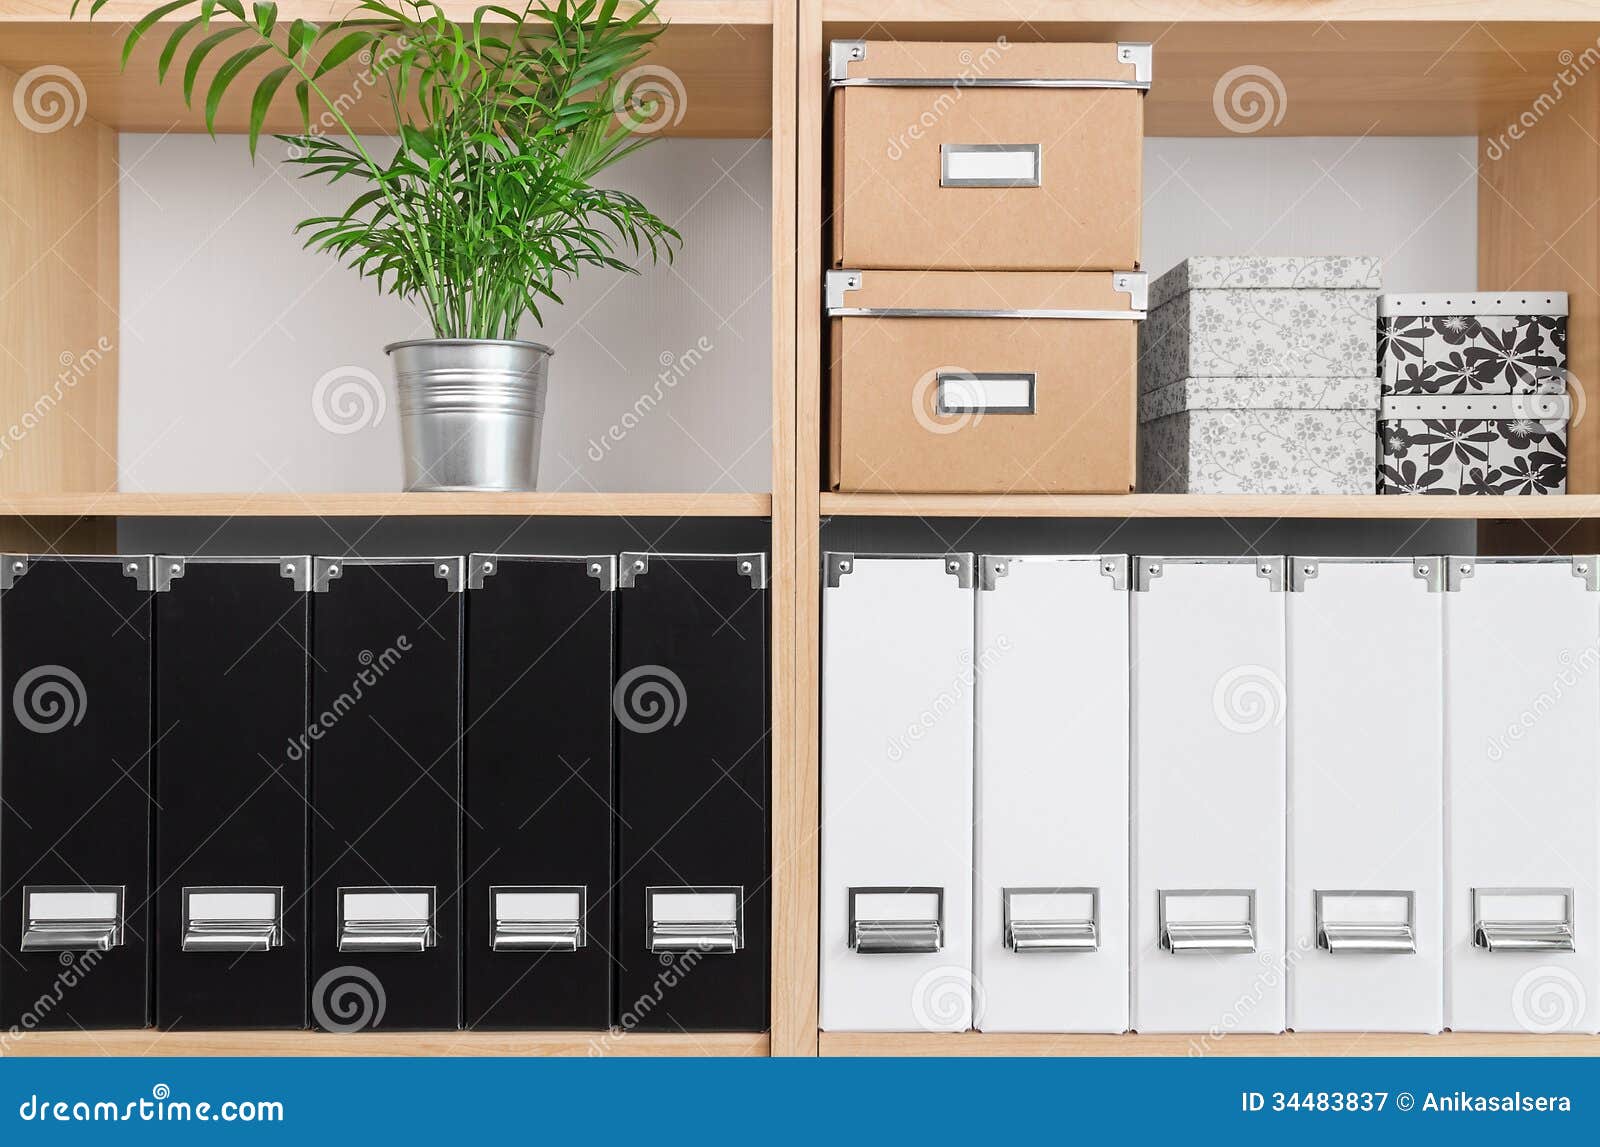 shelves with boxes, folders and green plant